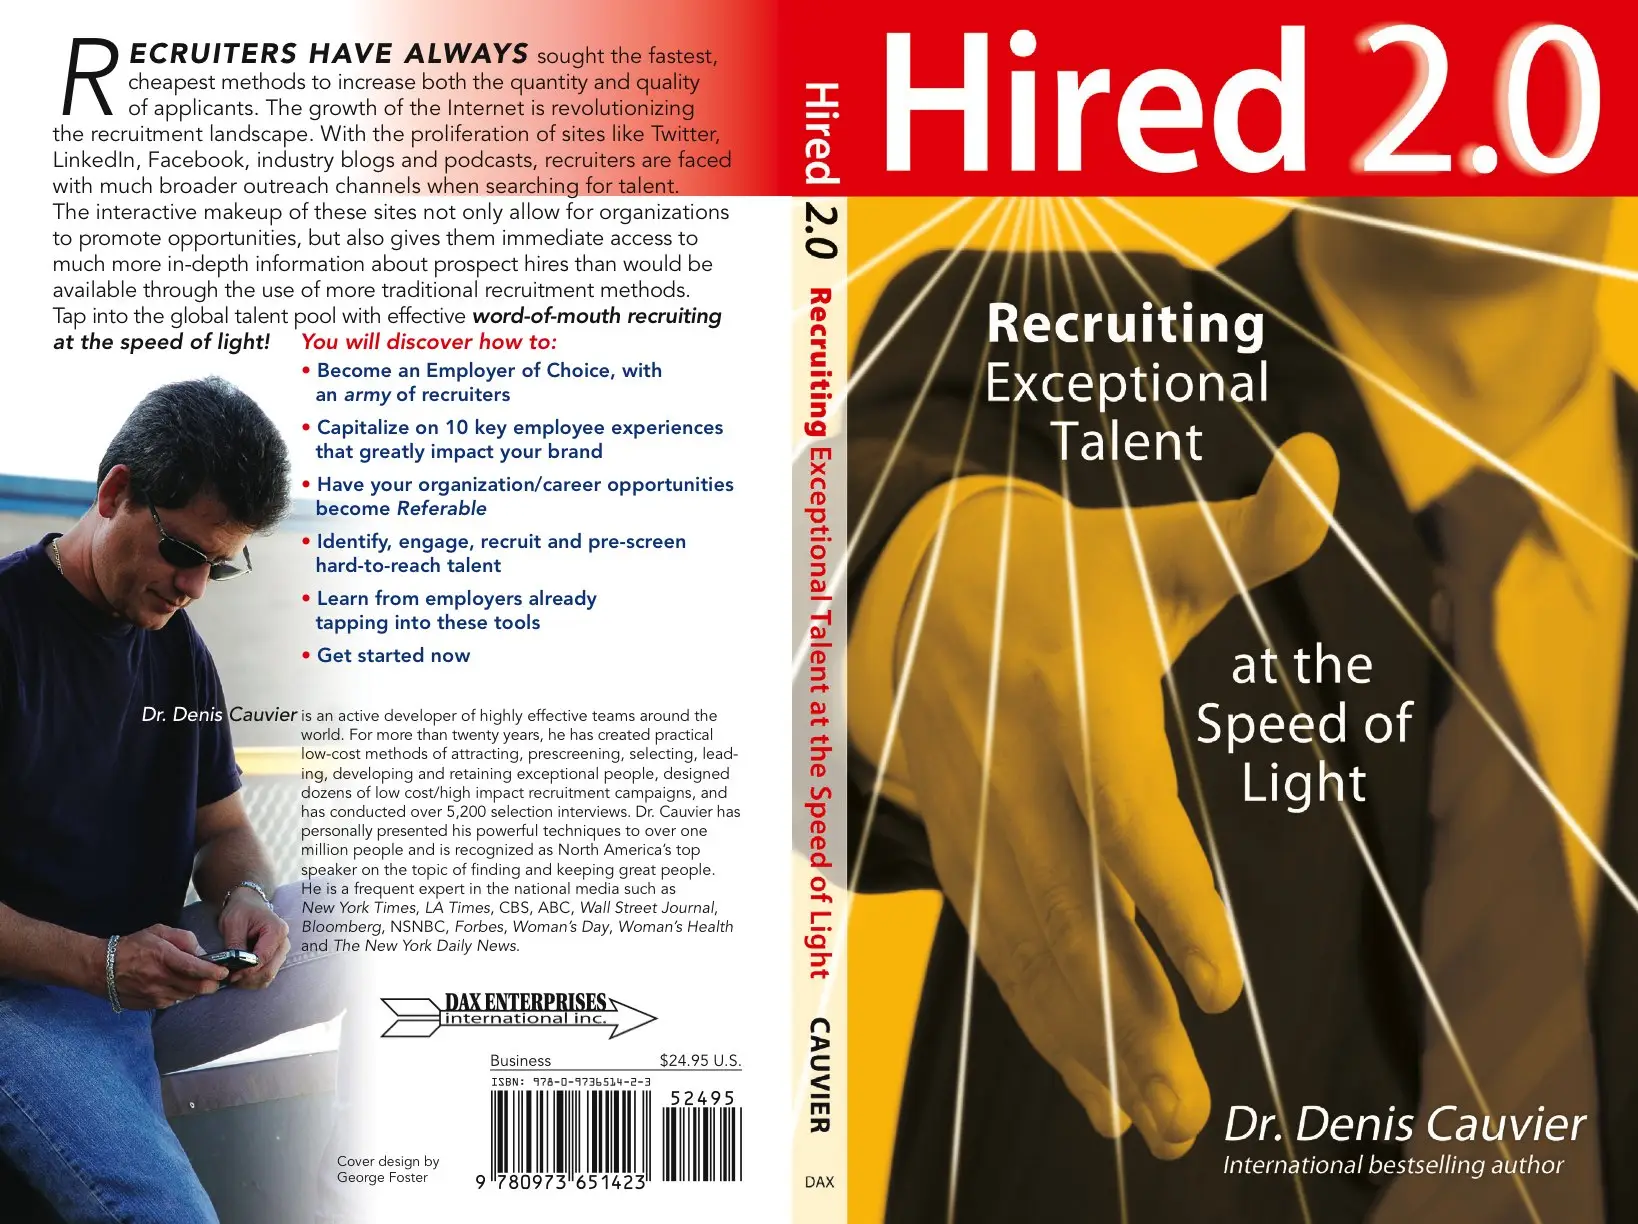 Dr. Denis Cauvier author of Hired 2.0 Podcast Interview with @shanegibson